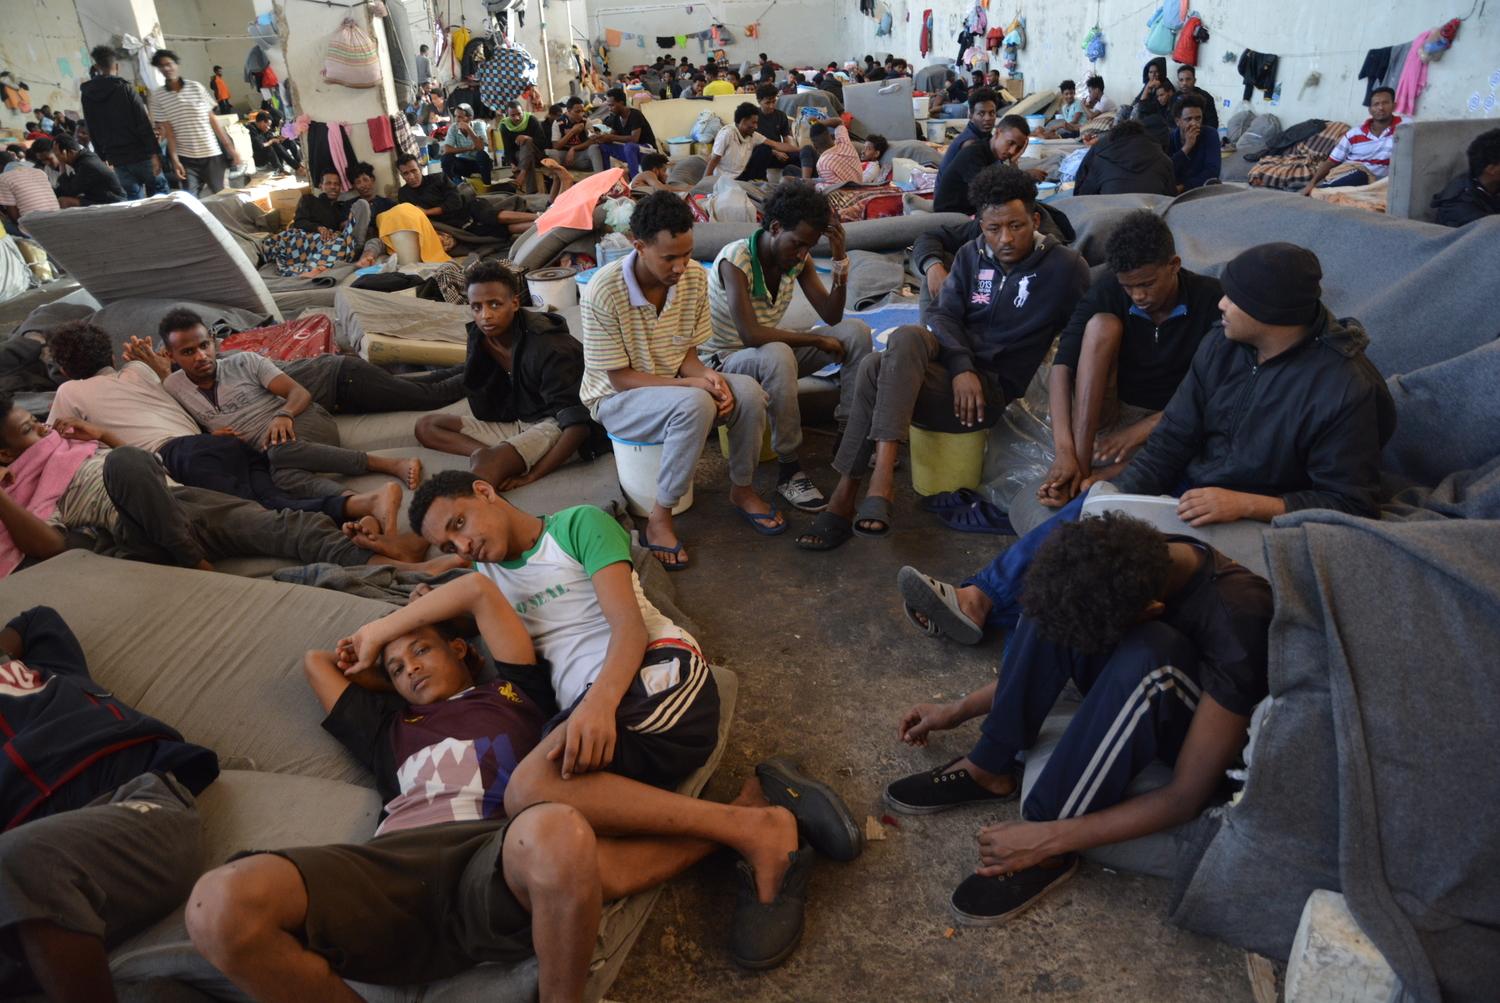 Some of the 700 refugees detained in the main warehouse of Zintan detention centre. In June 2019, the detainees were distributed in other buildings within the compound. Libya, July 2019. 